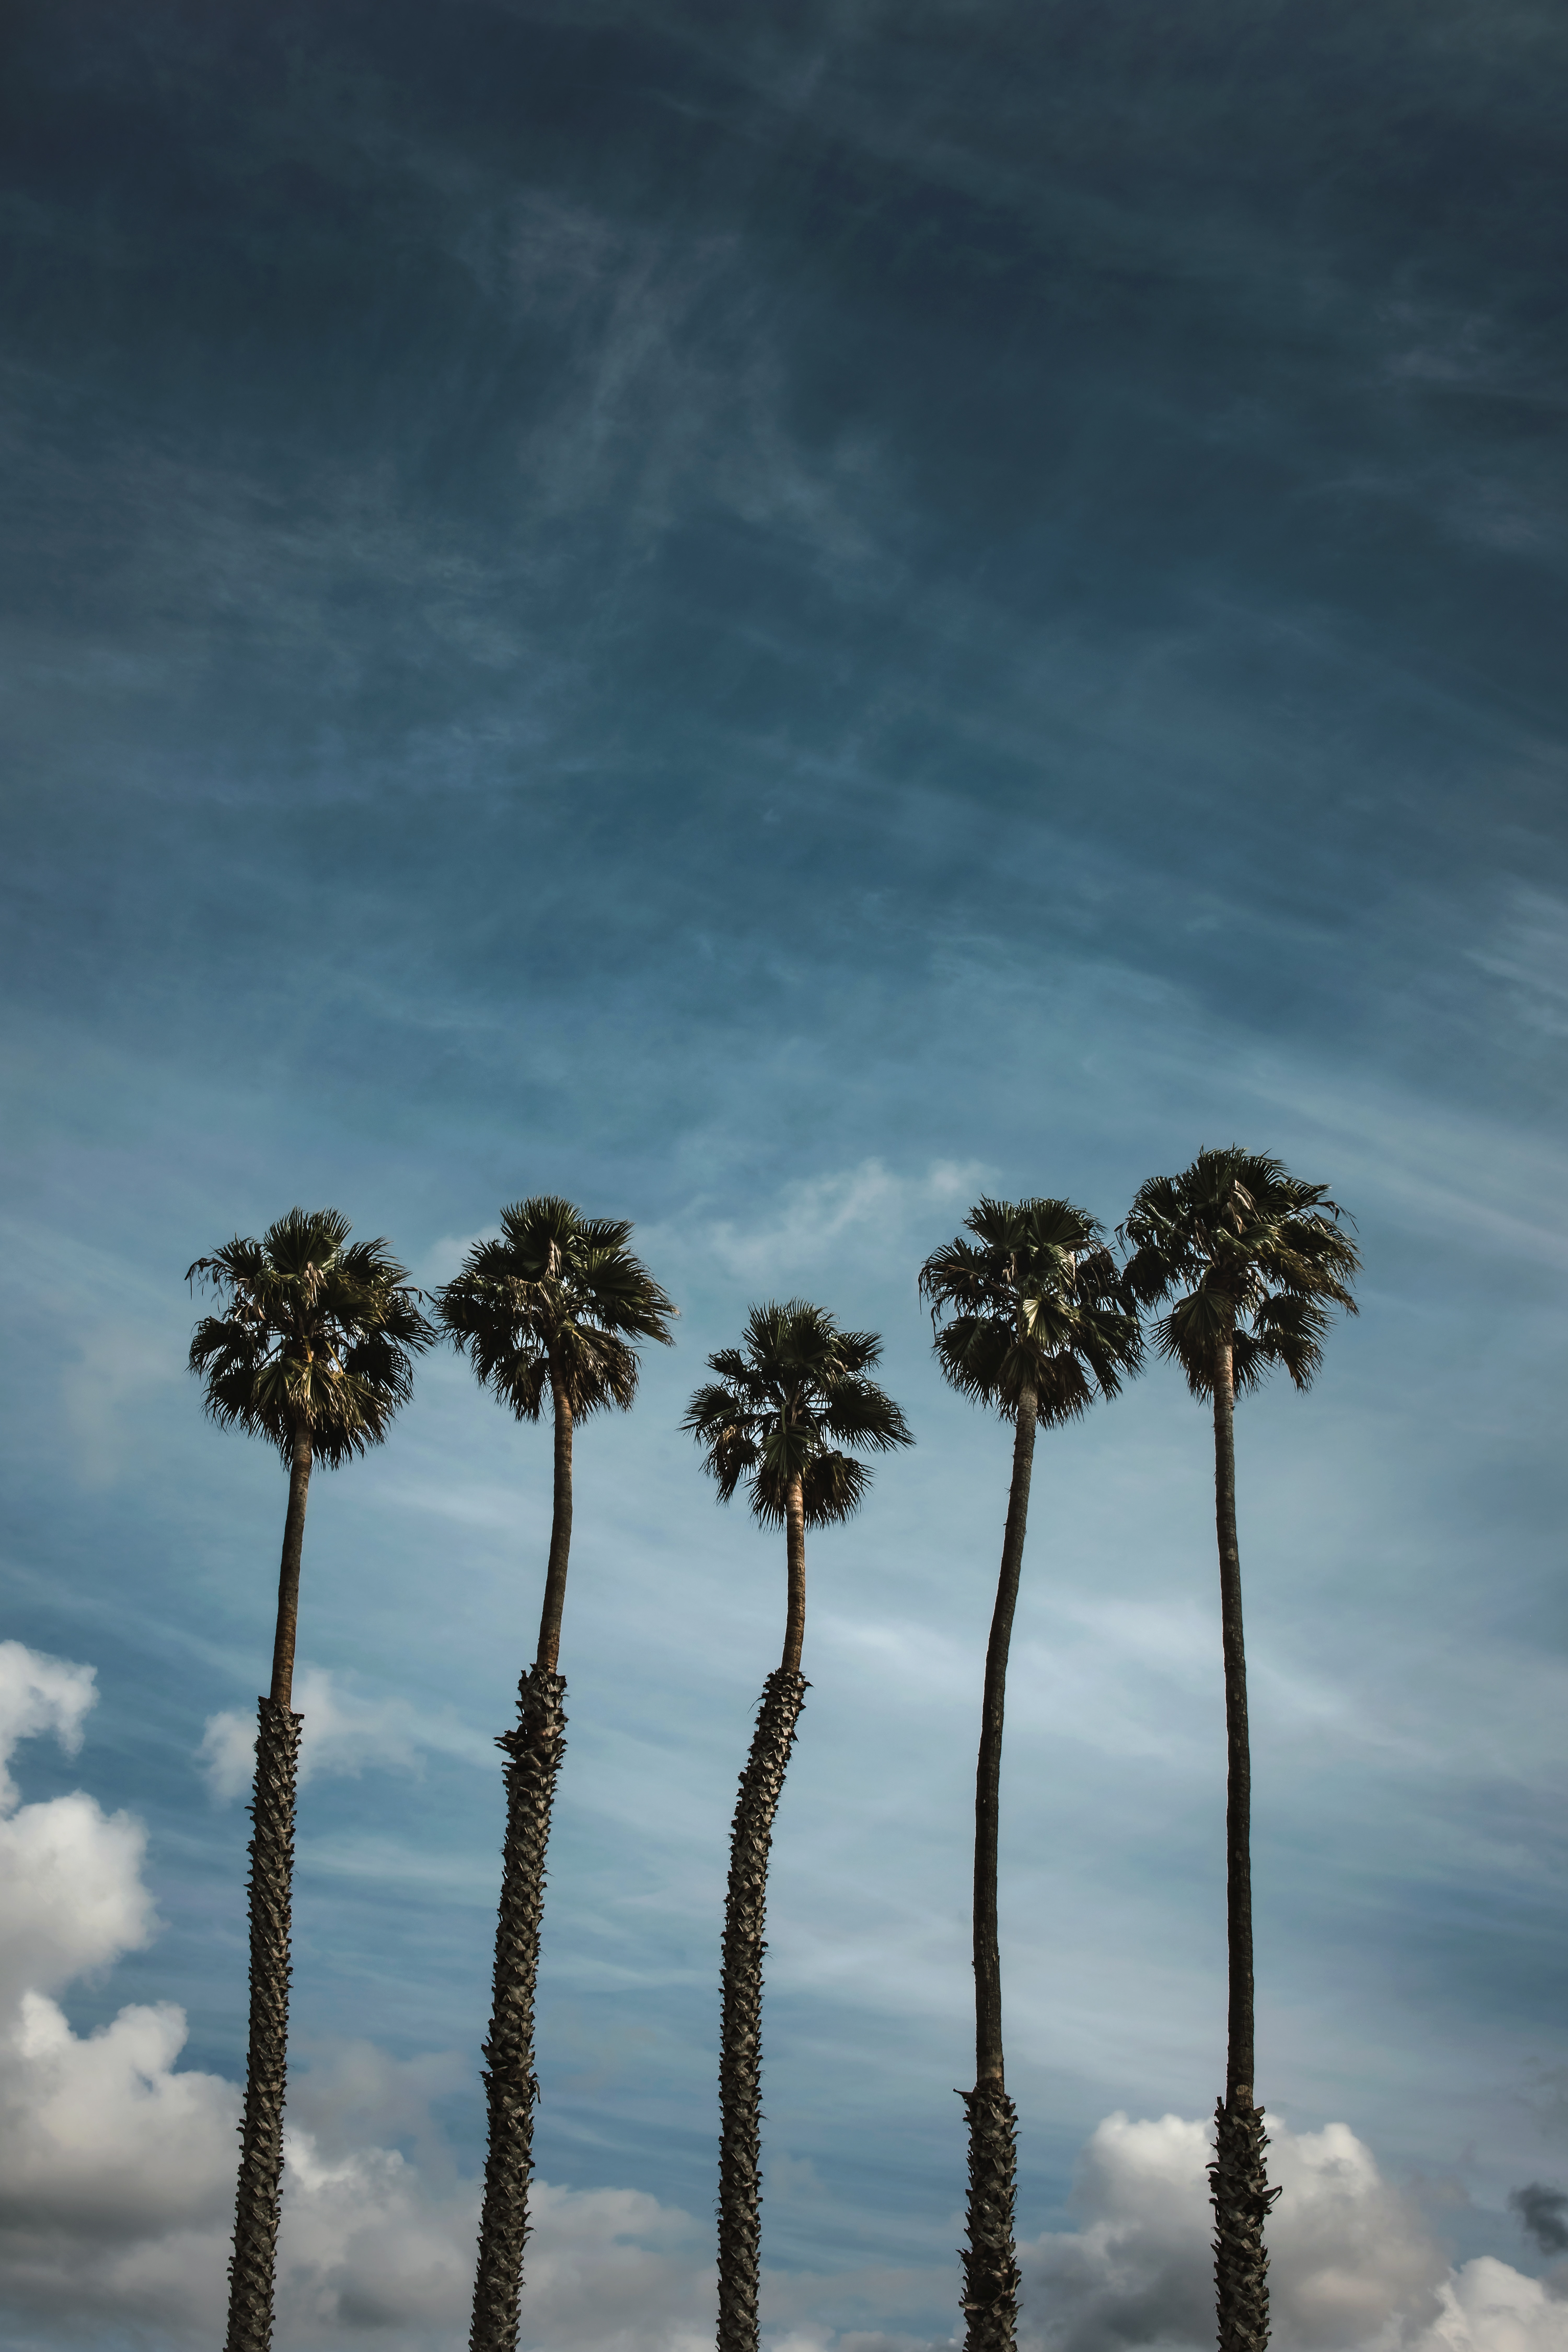 Cool Wallpapers sky, nature, trees, clouds, palms, tropics